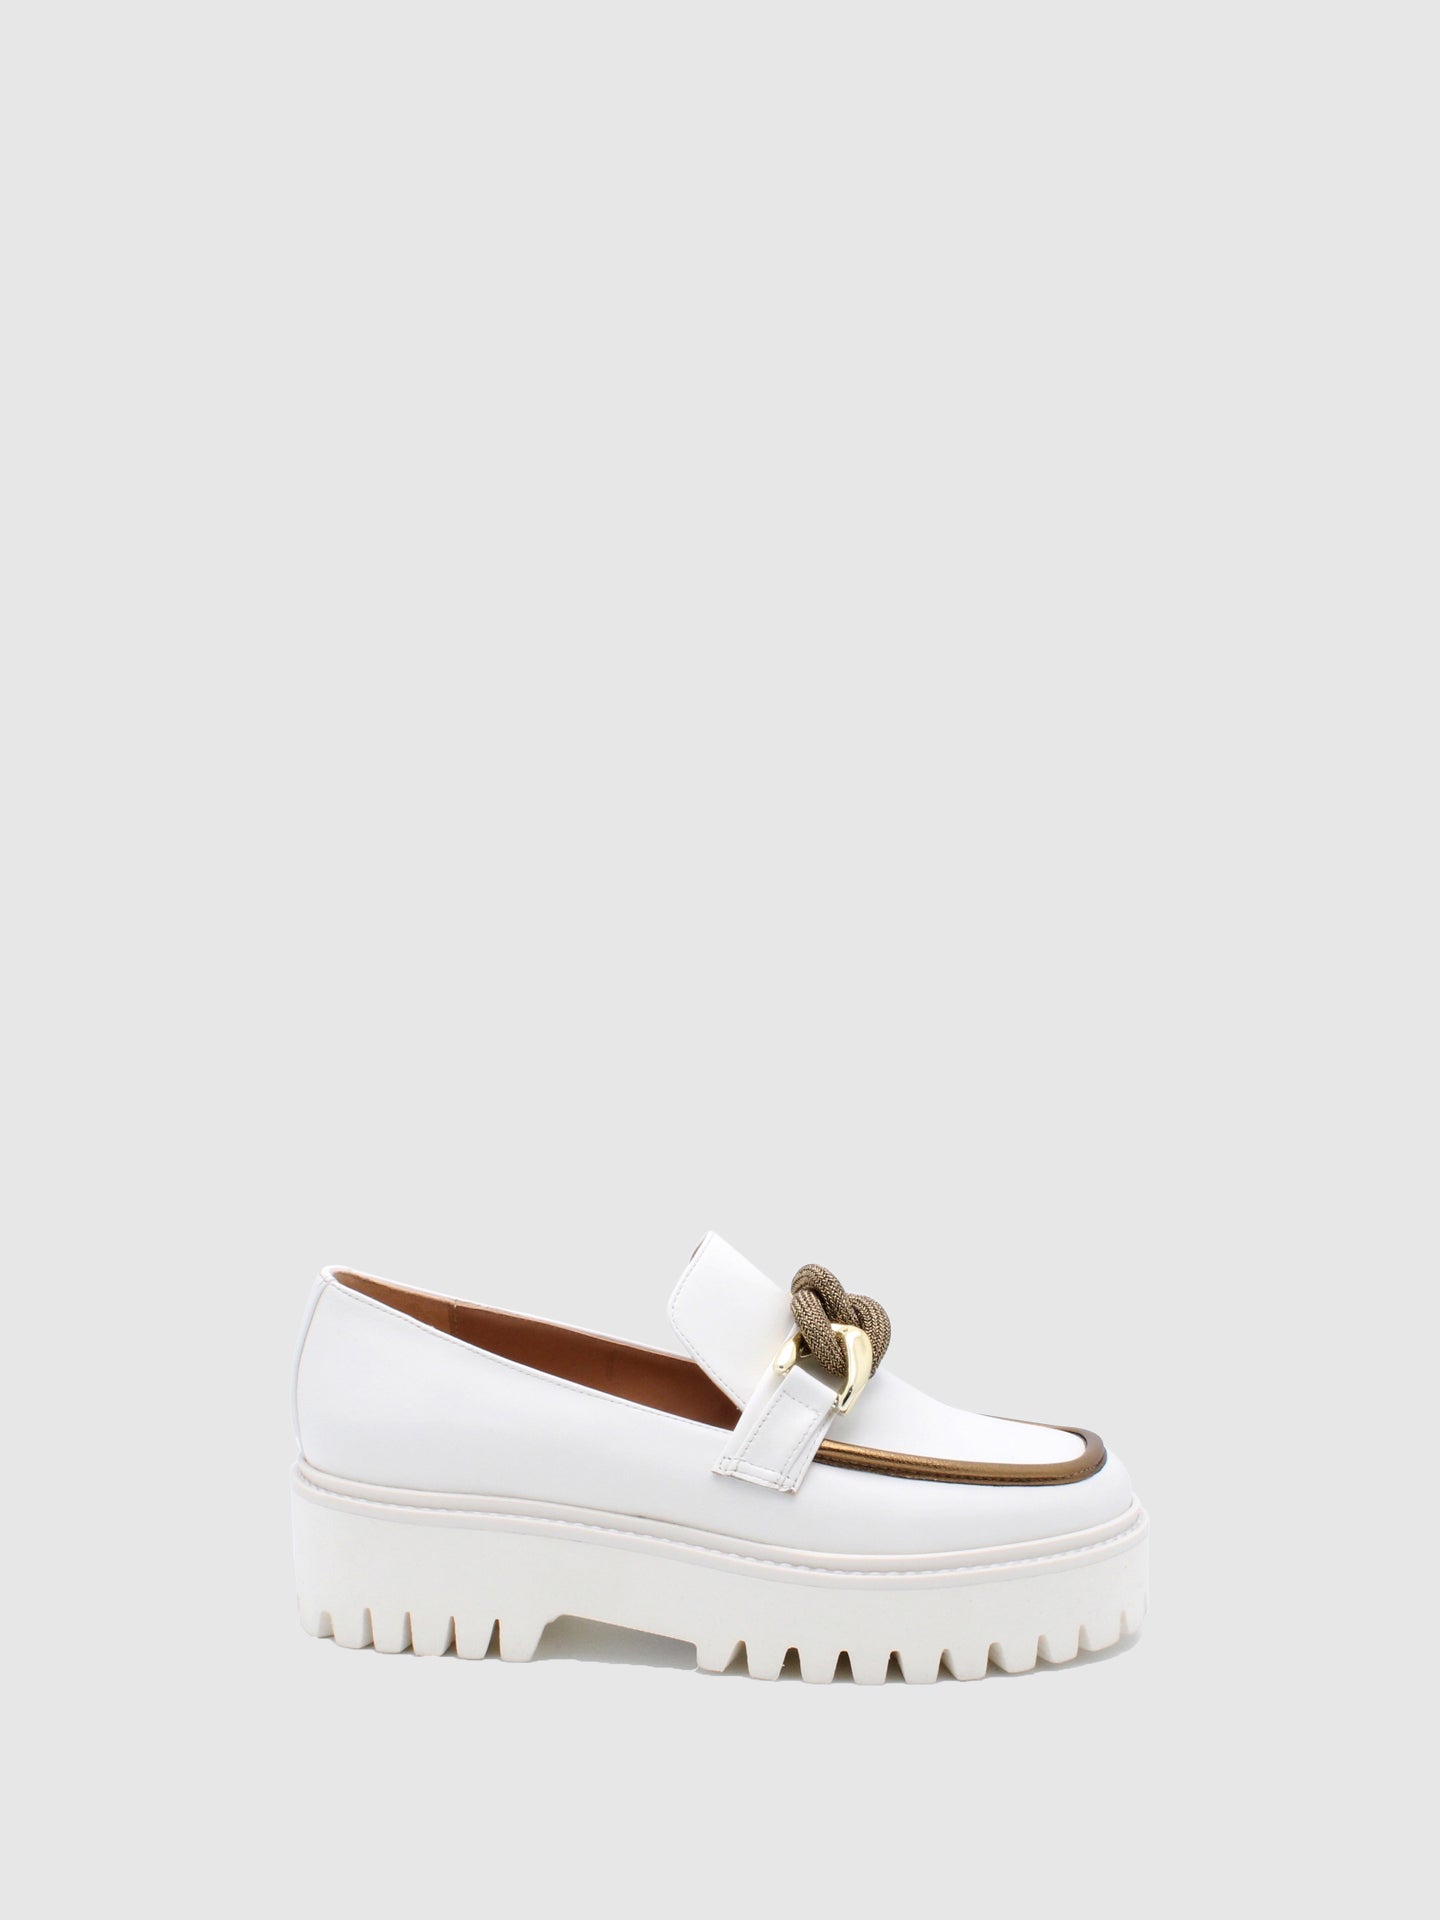 JJ Heitor Appliqués Loafers Hunky Panky Off White/Gold